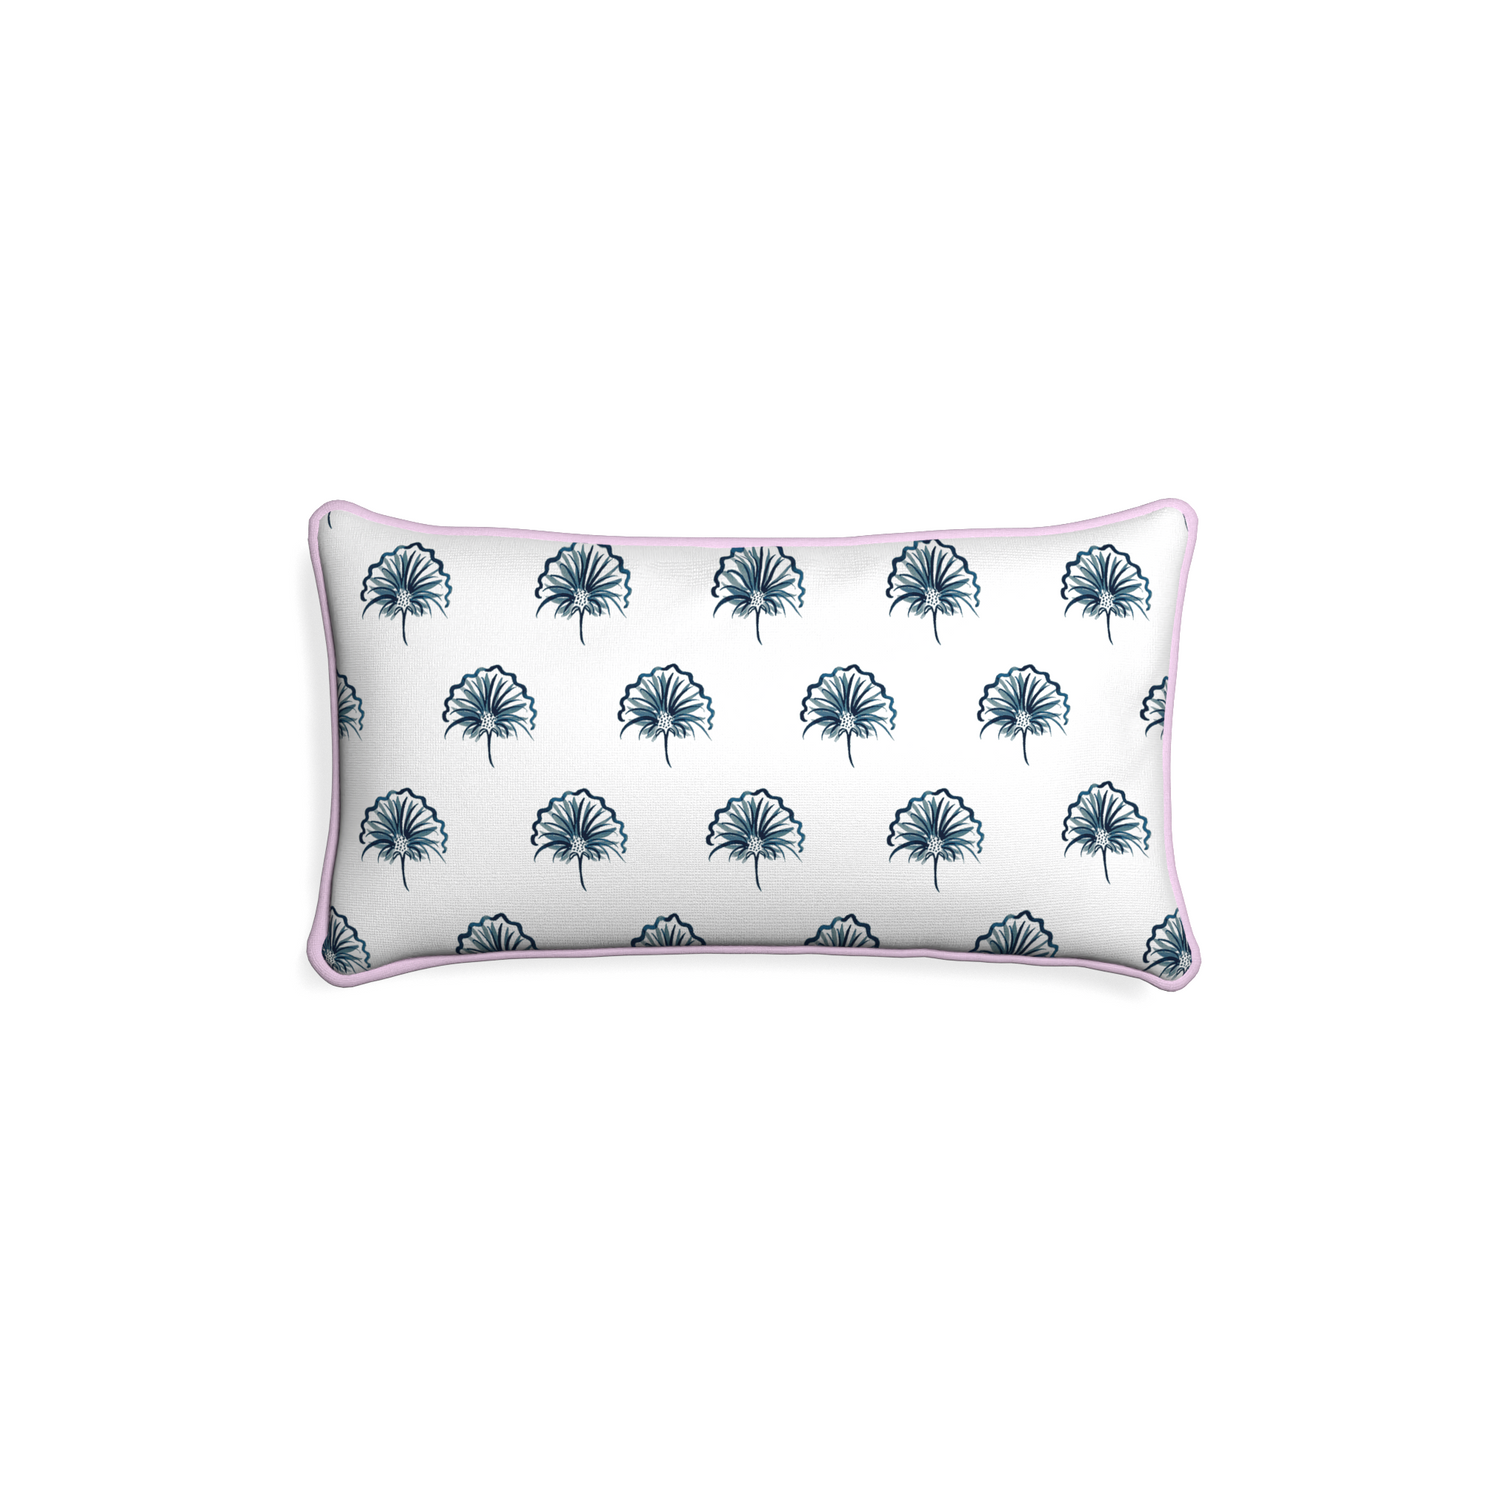 Petite-lumbar penelope midnight custom floral navypillow with l piping on white background